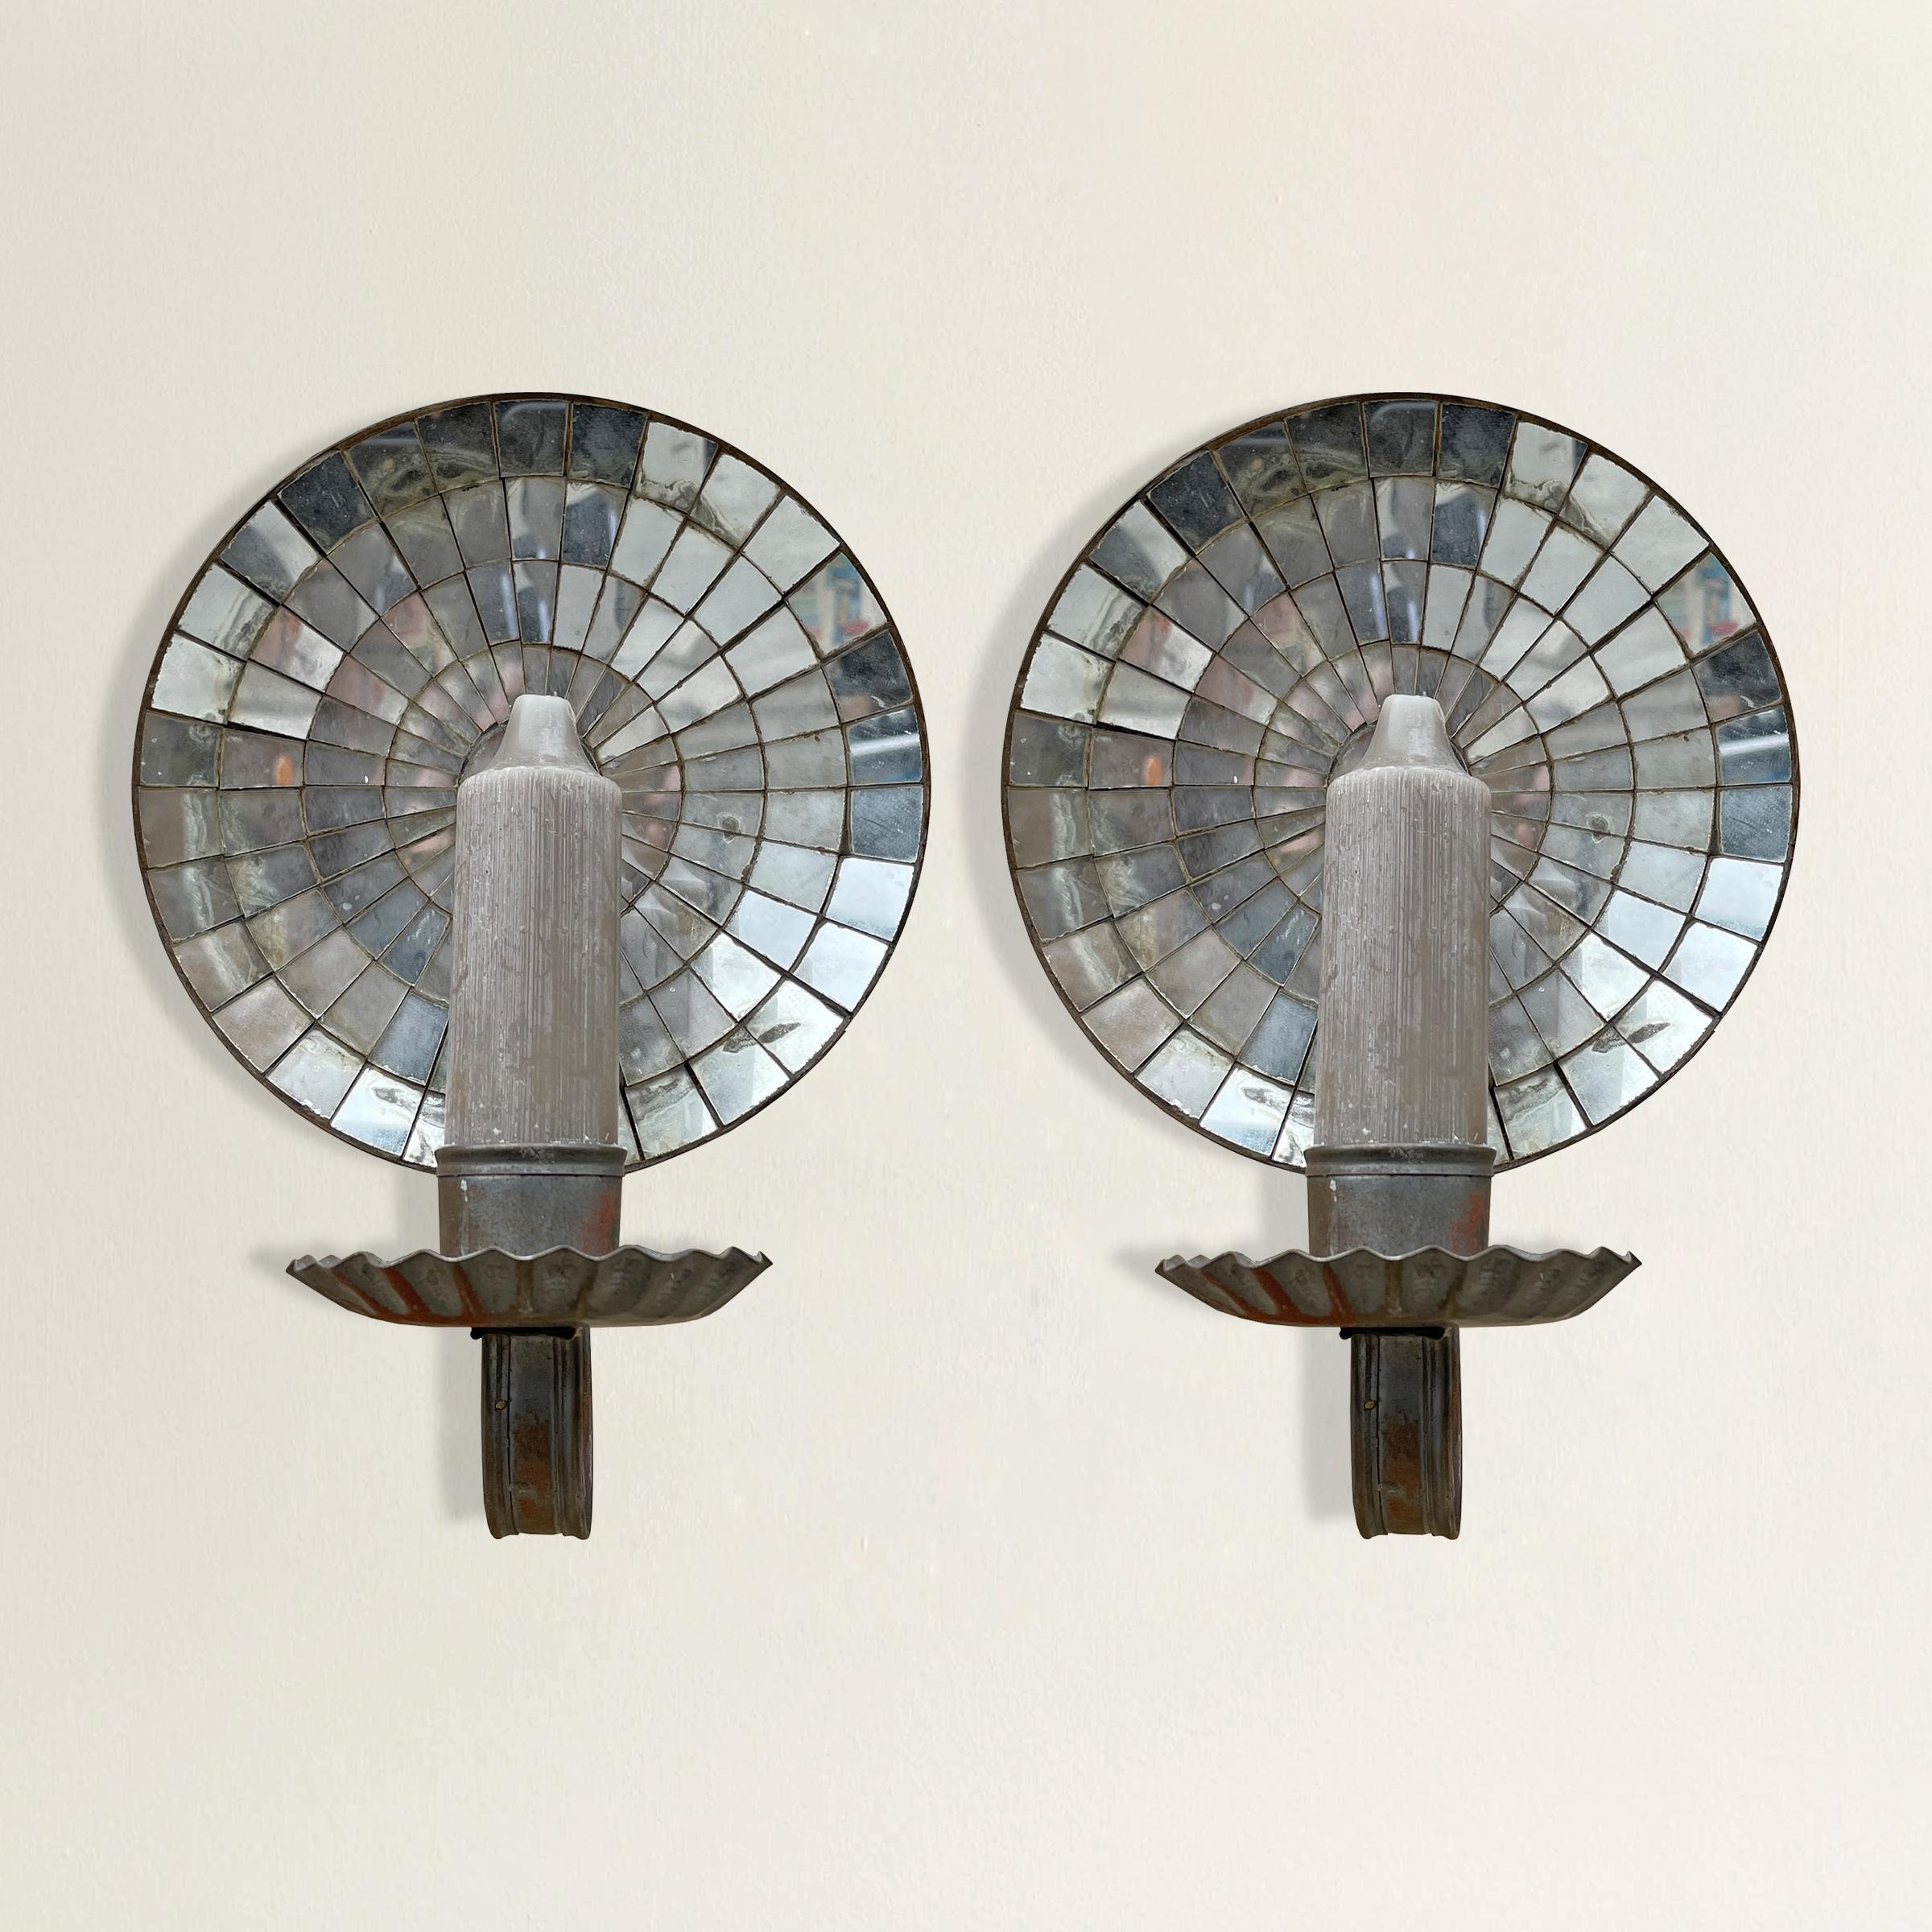 A striking pair of American tin candle sconces, each with a convex mirrored reflector and ruffled candle cup. While they were designed to work with candles and have never been electrified, it would be fairly simple to convert them to electricity.